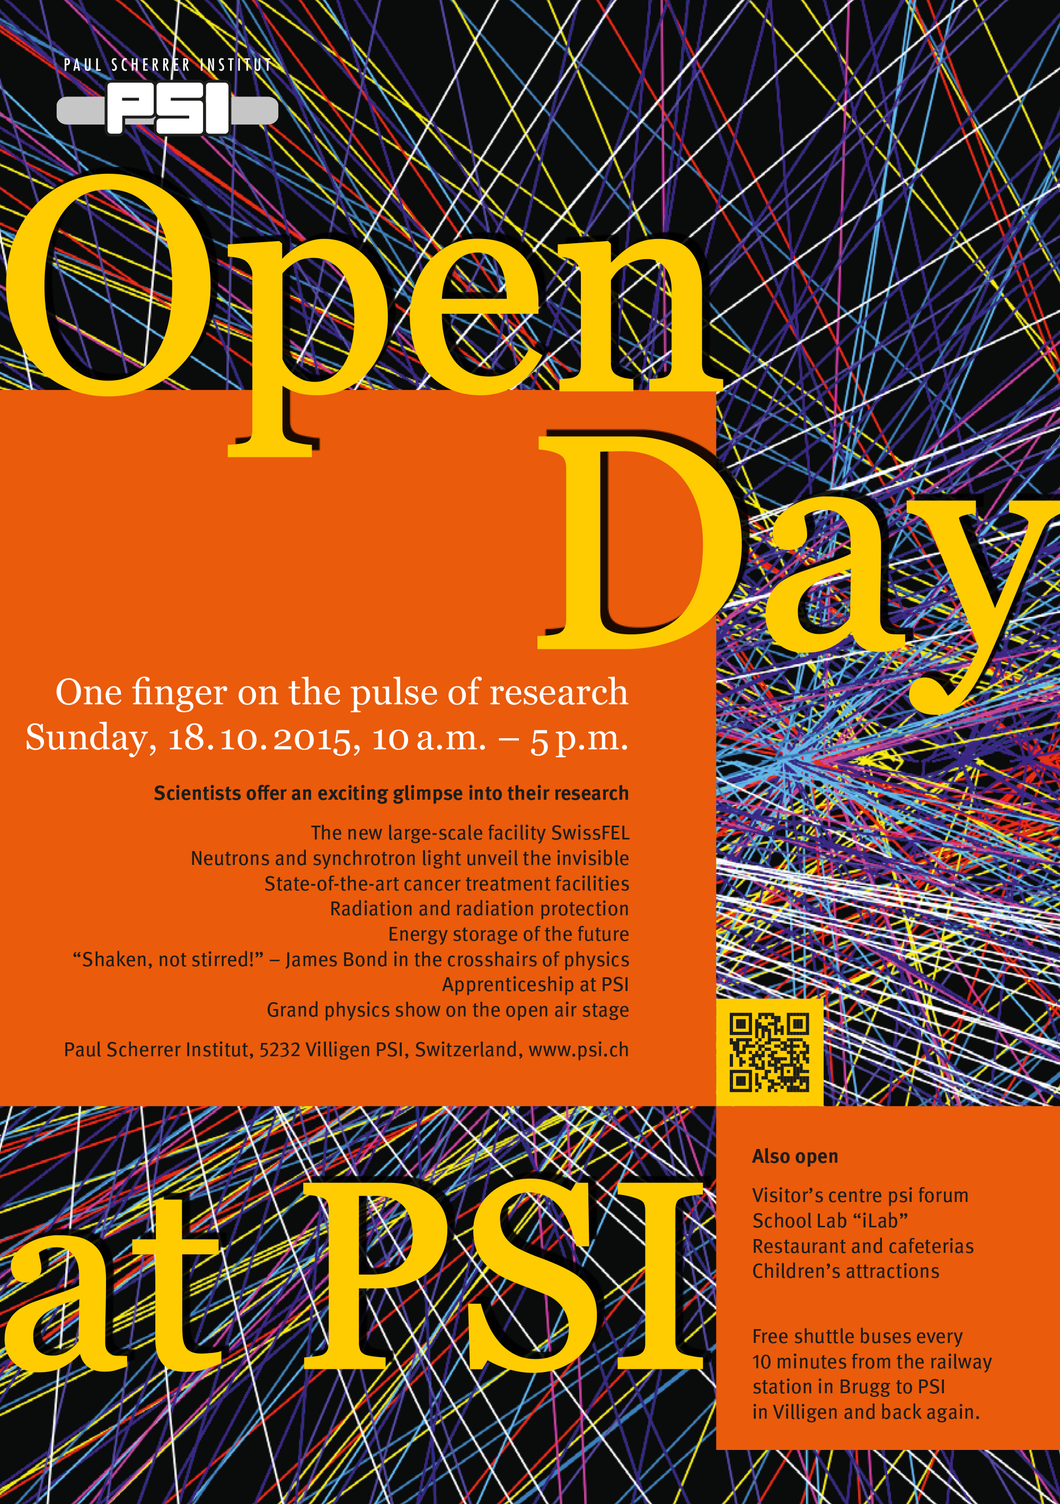 PSI opens its doors to the public on 18 October 2015.